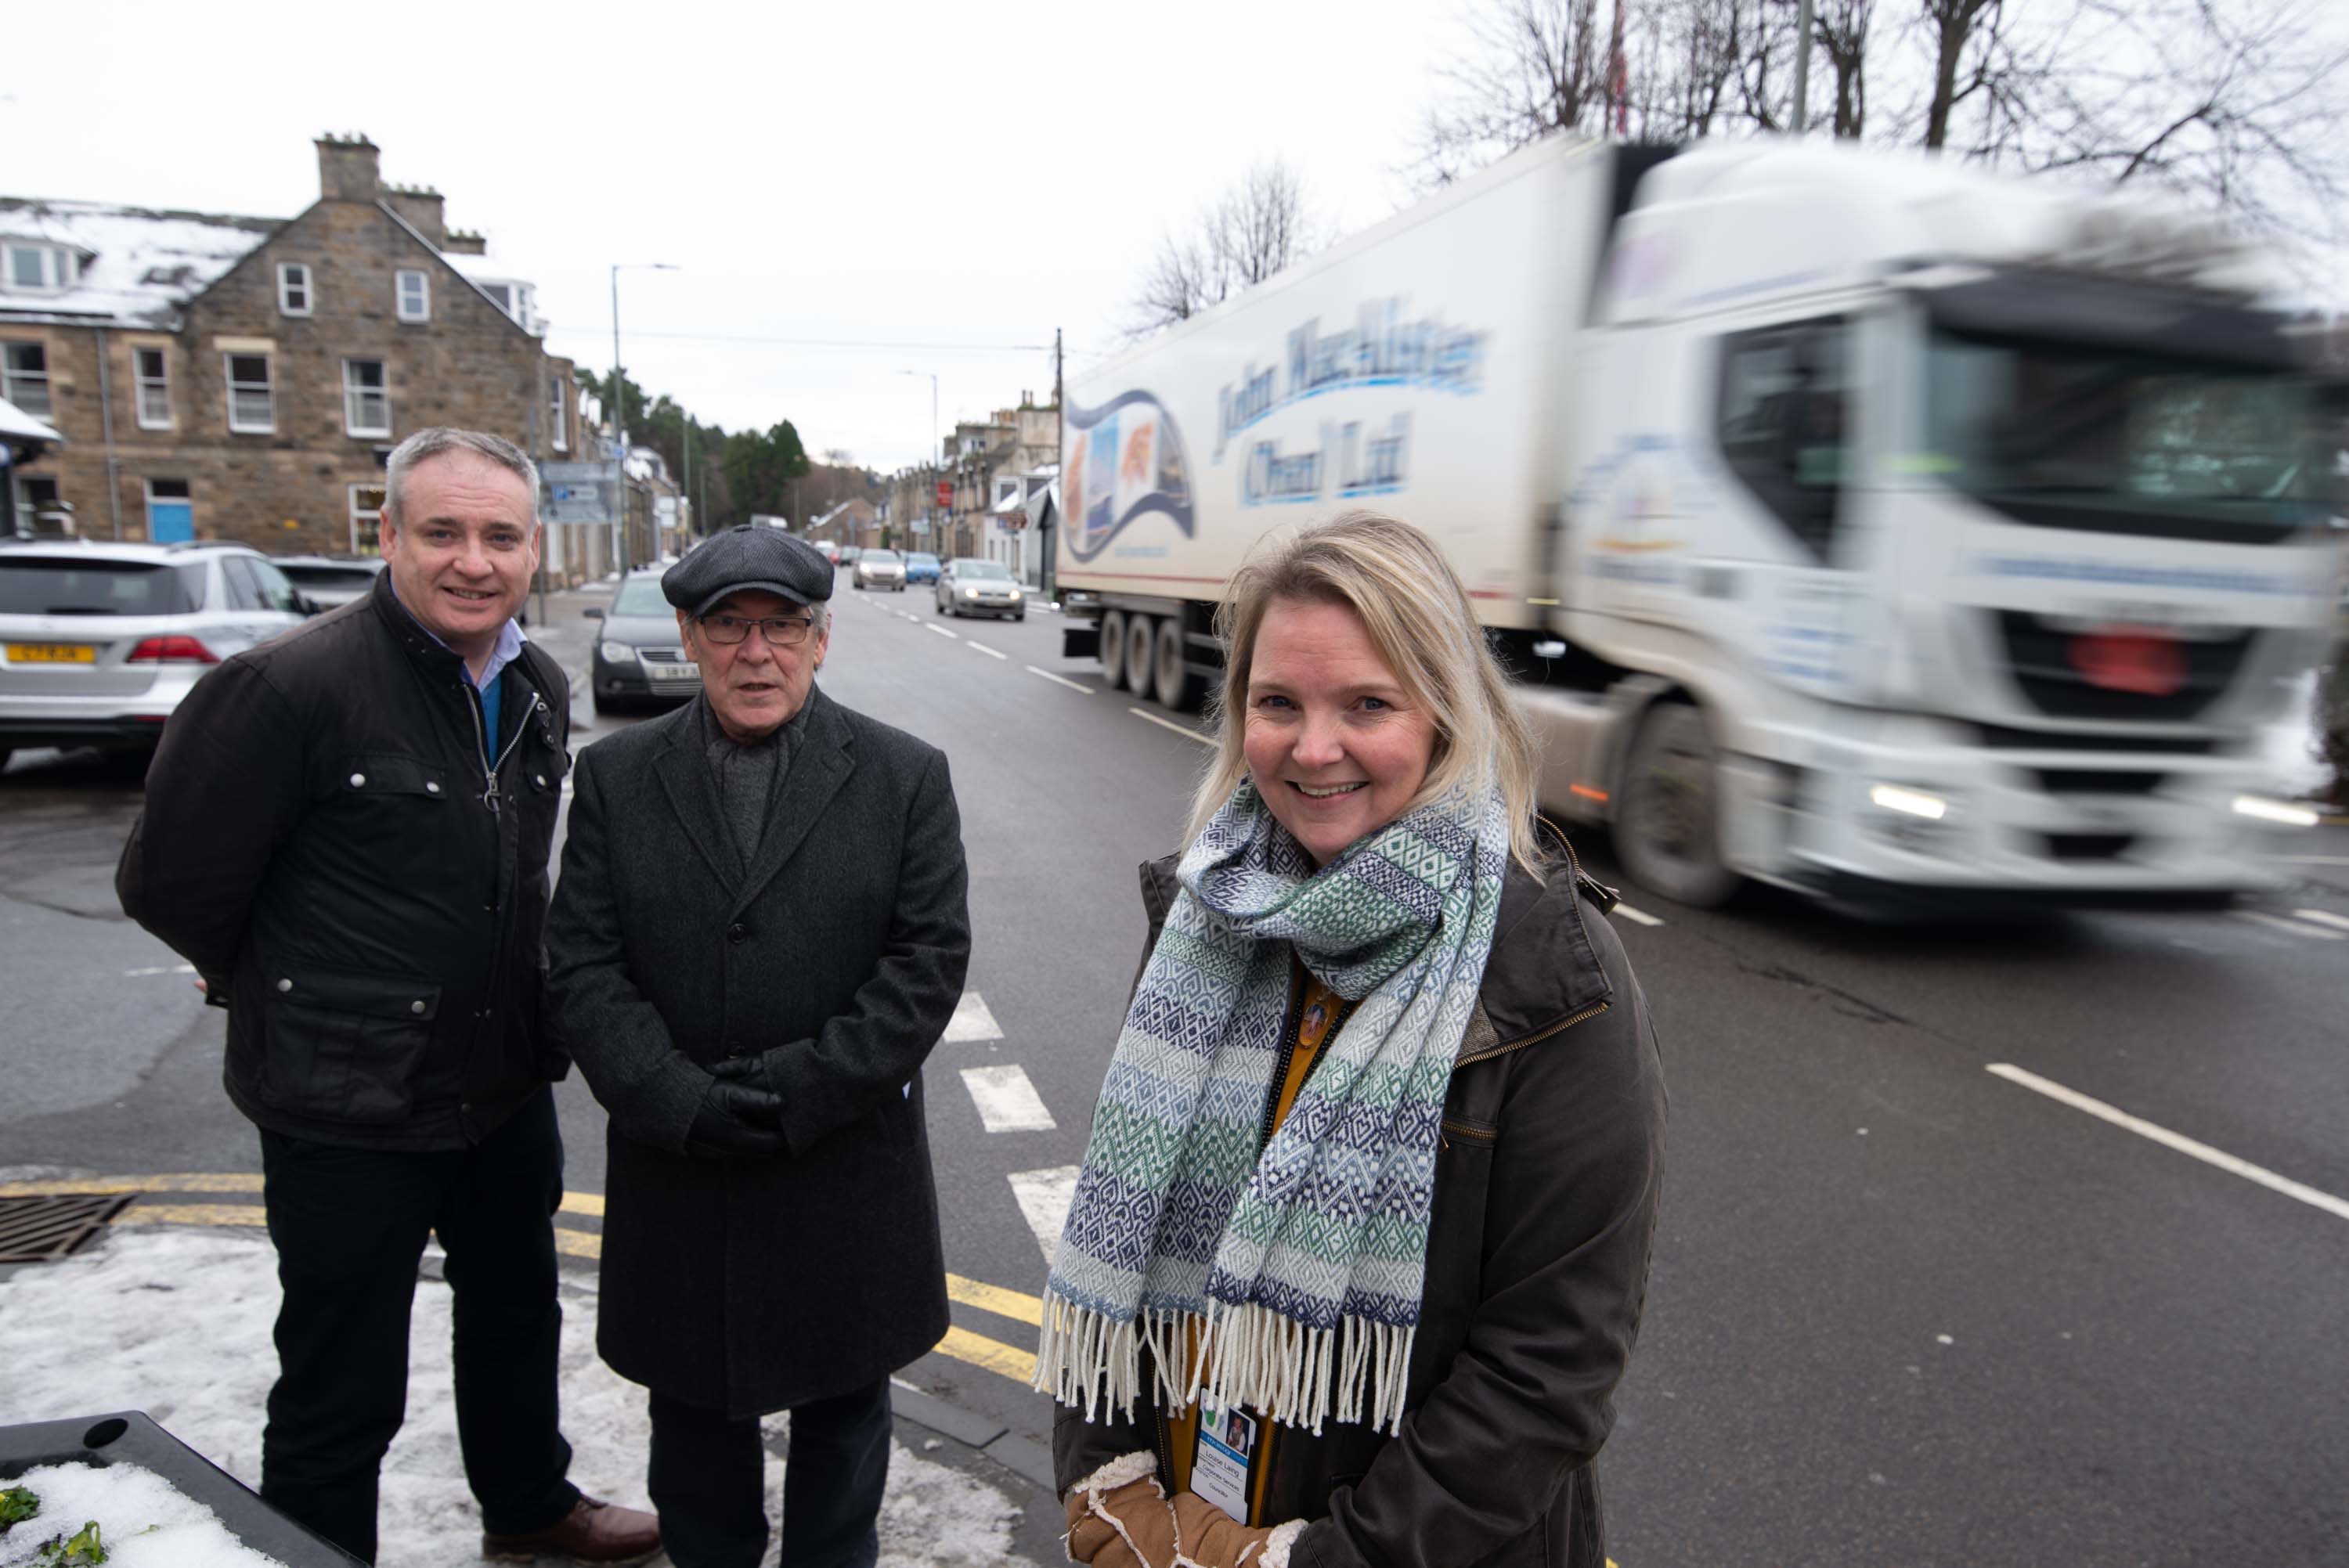 Moray MSP Richard Lochhead, Aberlour Community Association vice-convener Brian Hinnie and Speyside Glenlivet councillor Louise Laing have campaigned for a crossing across the A95 Aviemore road in Aberlour.